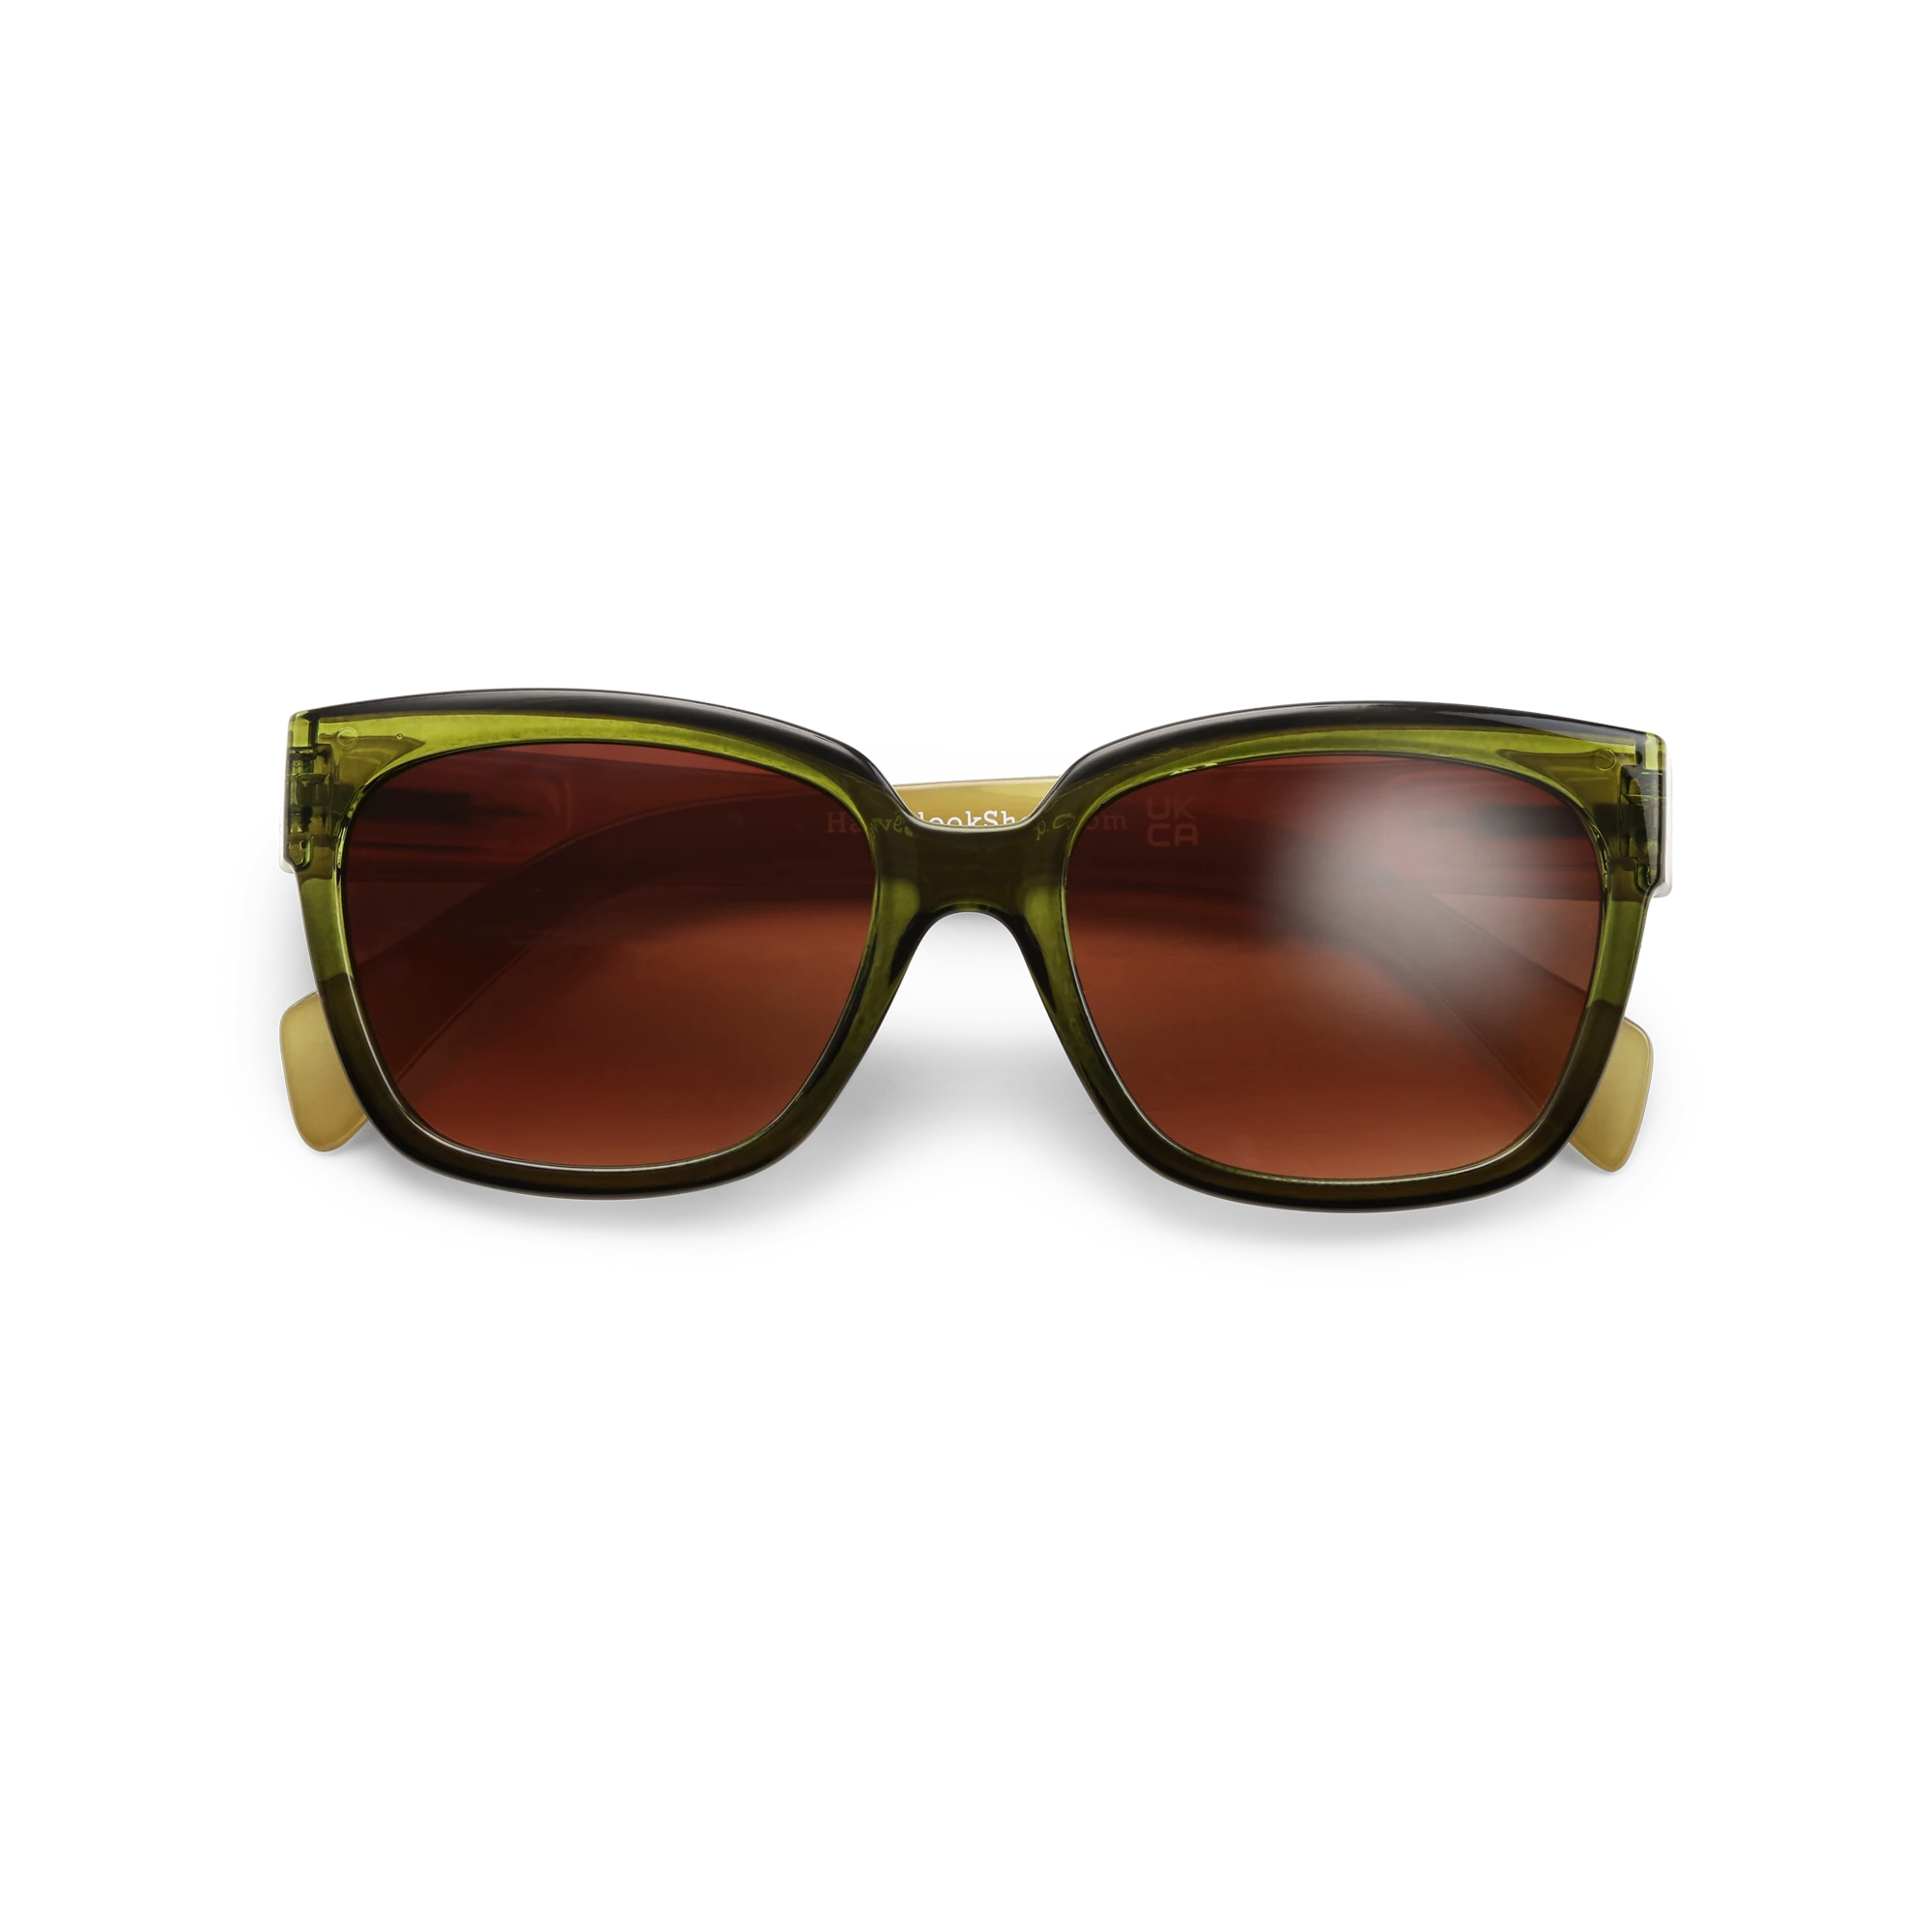 Mood Sunglasses - 100% UV Protection by Have A Look - Lifestory